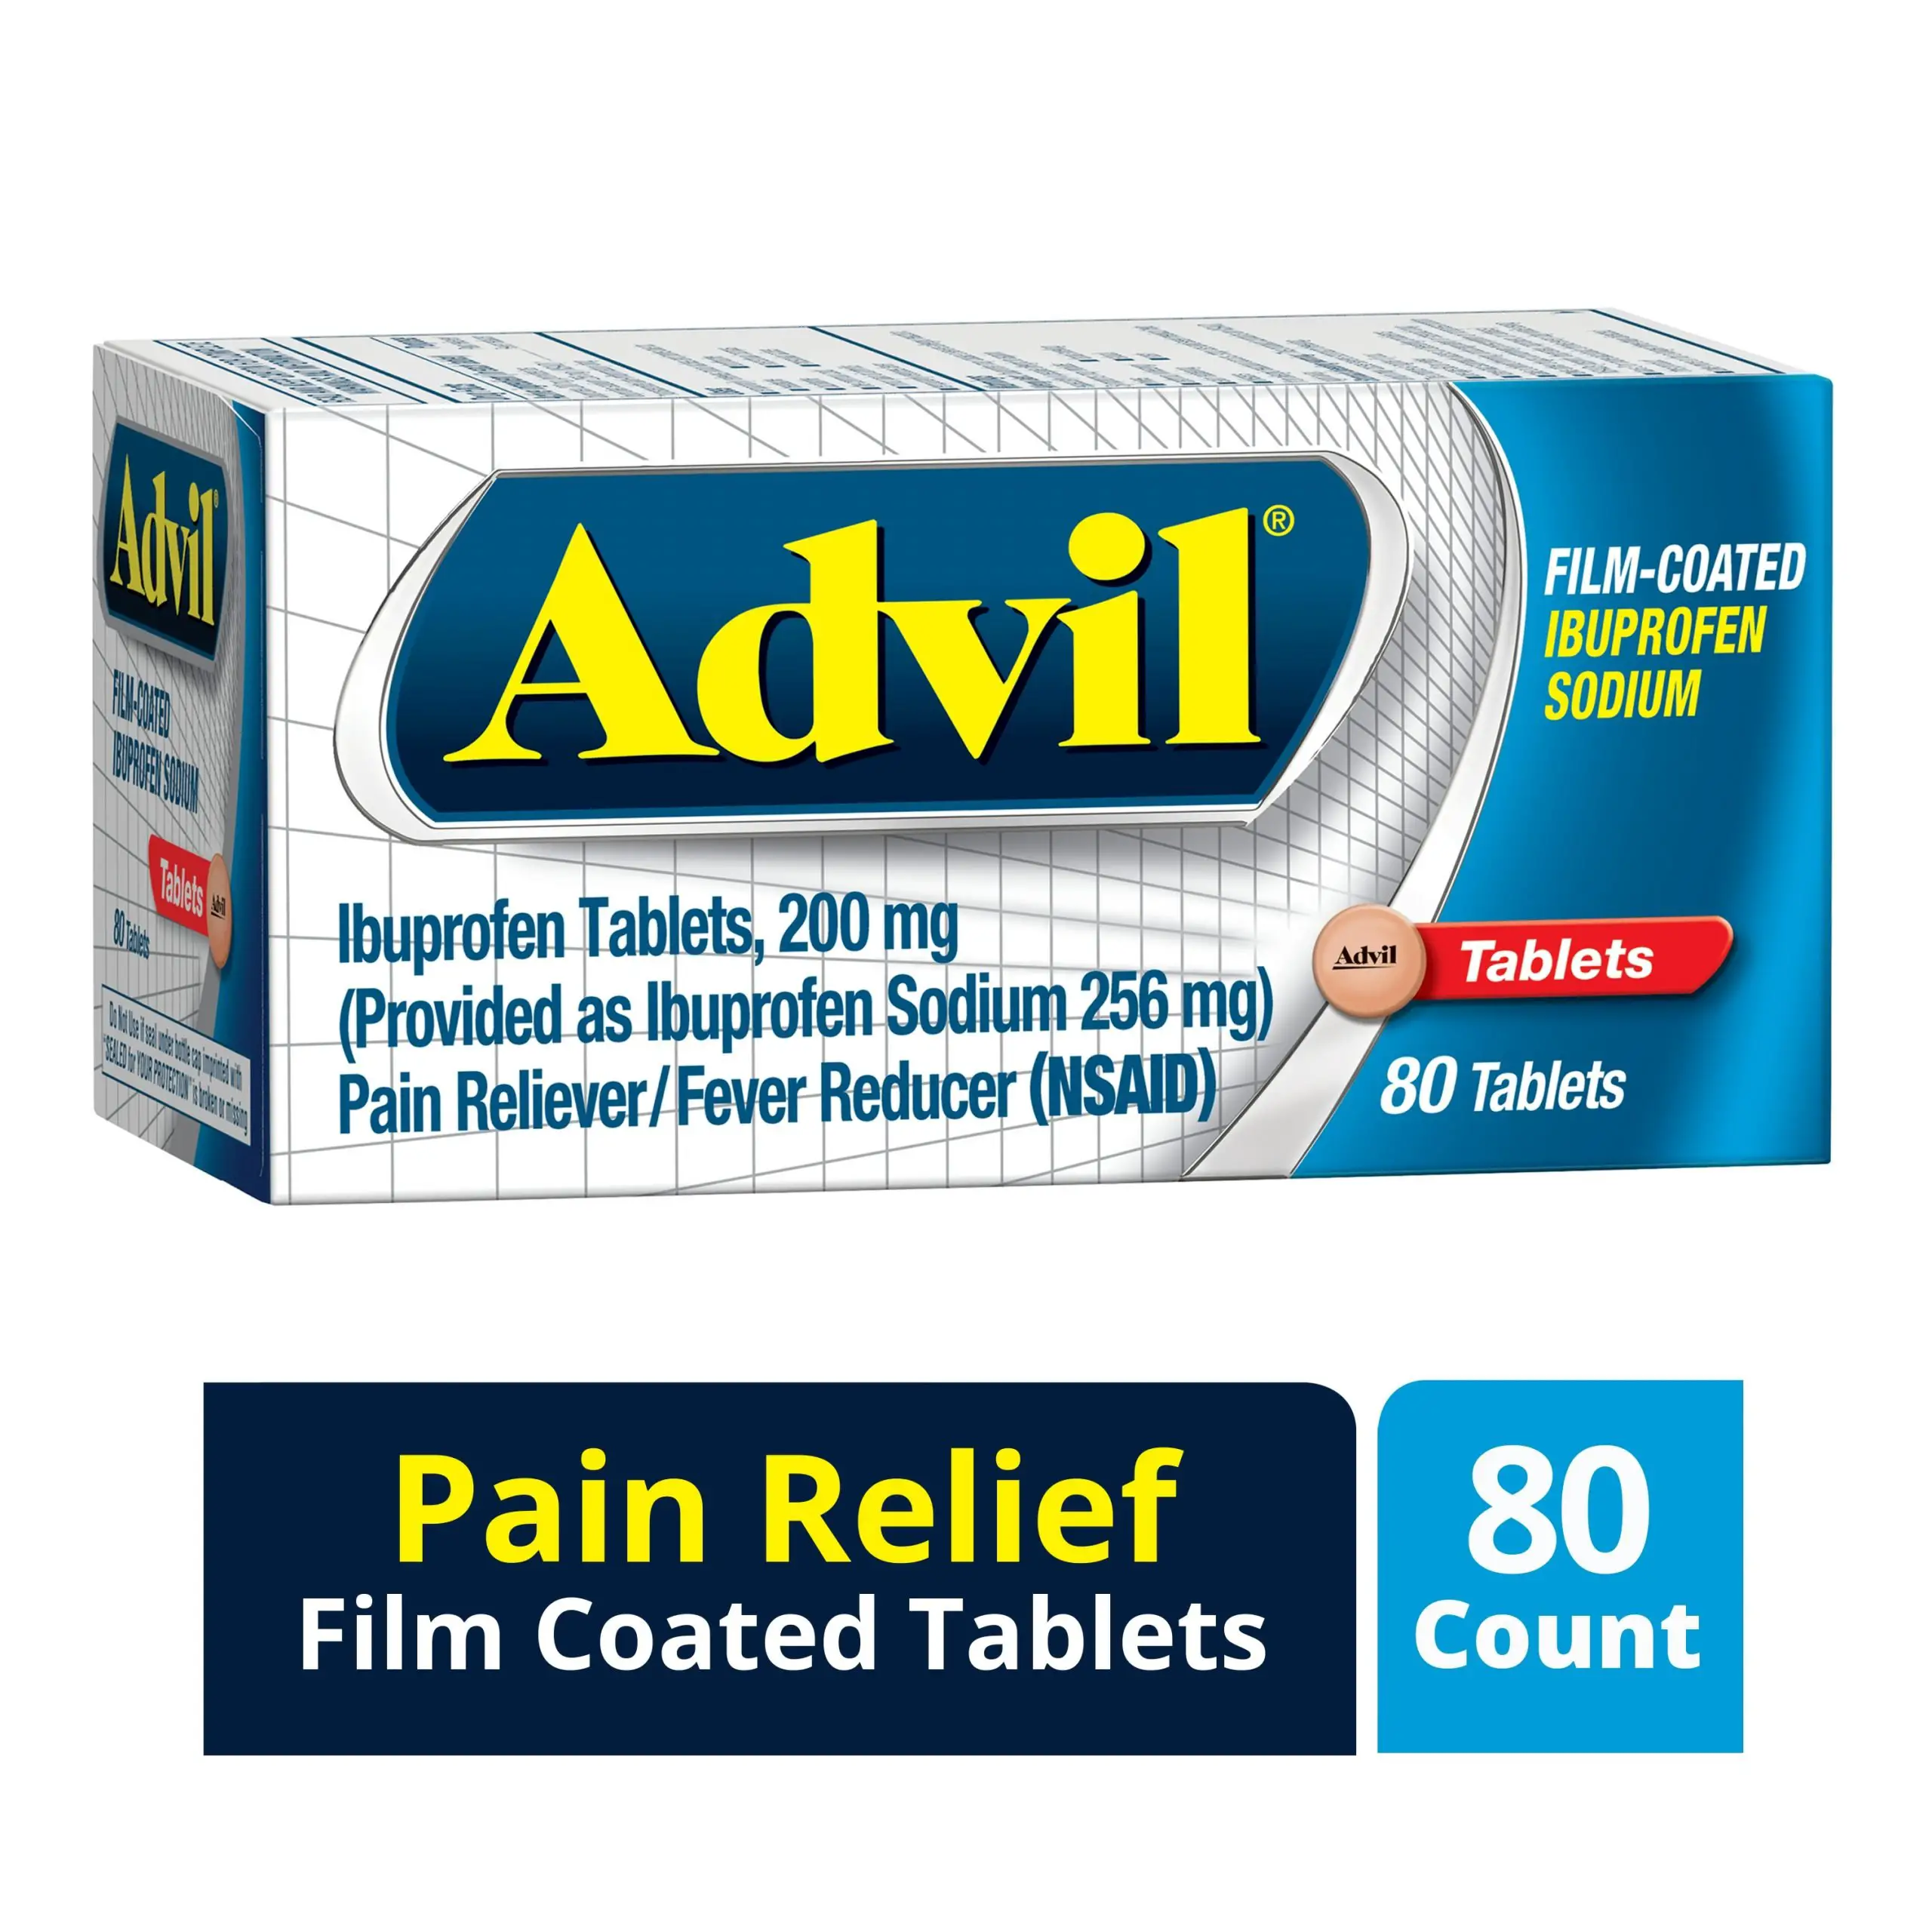 Advil Pain Reliever/Fever Reducer Ibuprofen Coated Tablets ...